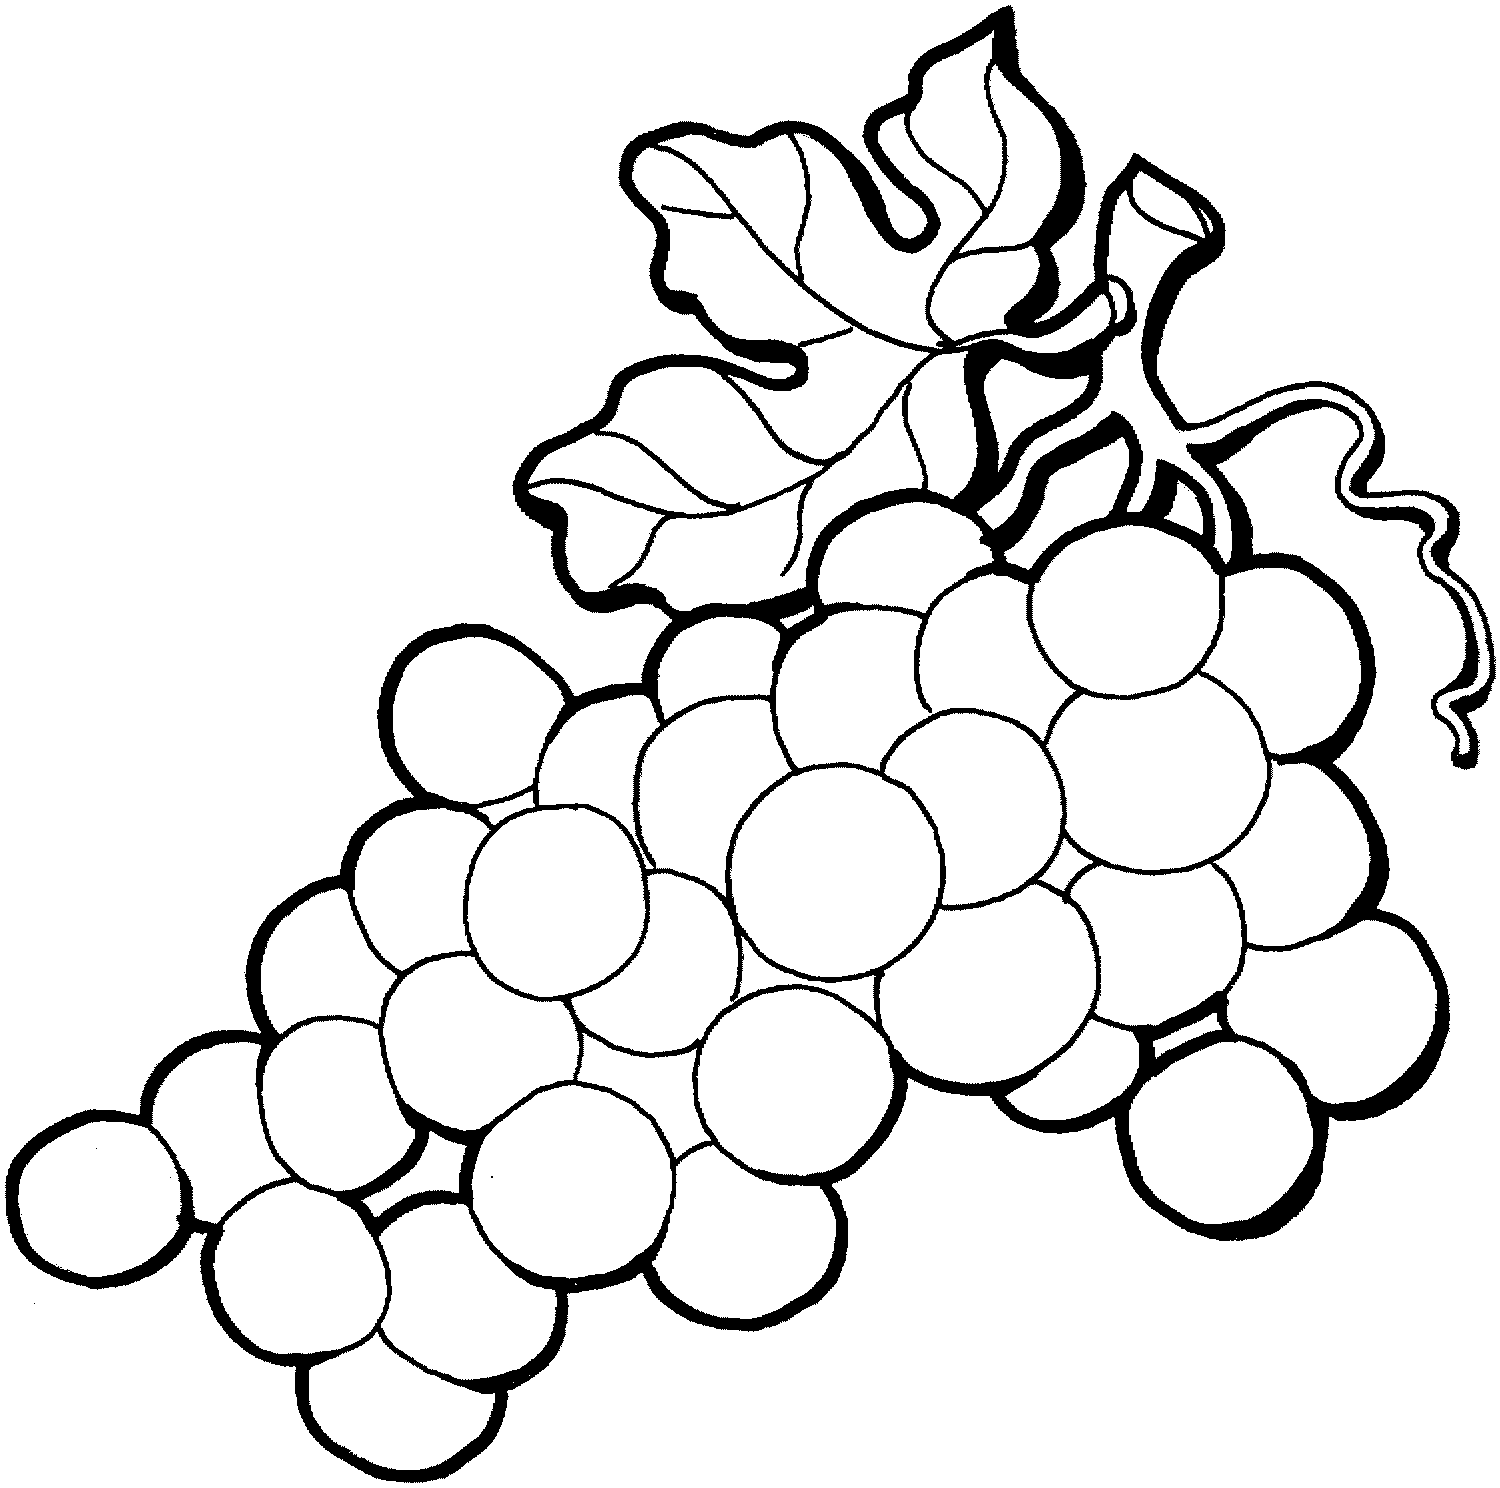 grapes pictures for colouring grapes pictures for colouring grapes for colouring pictures 